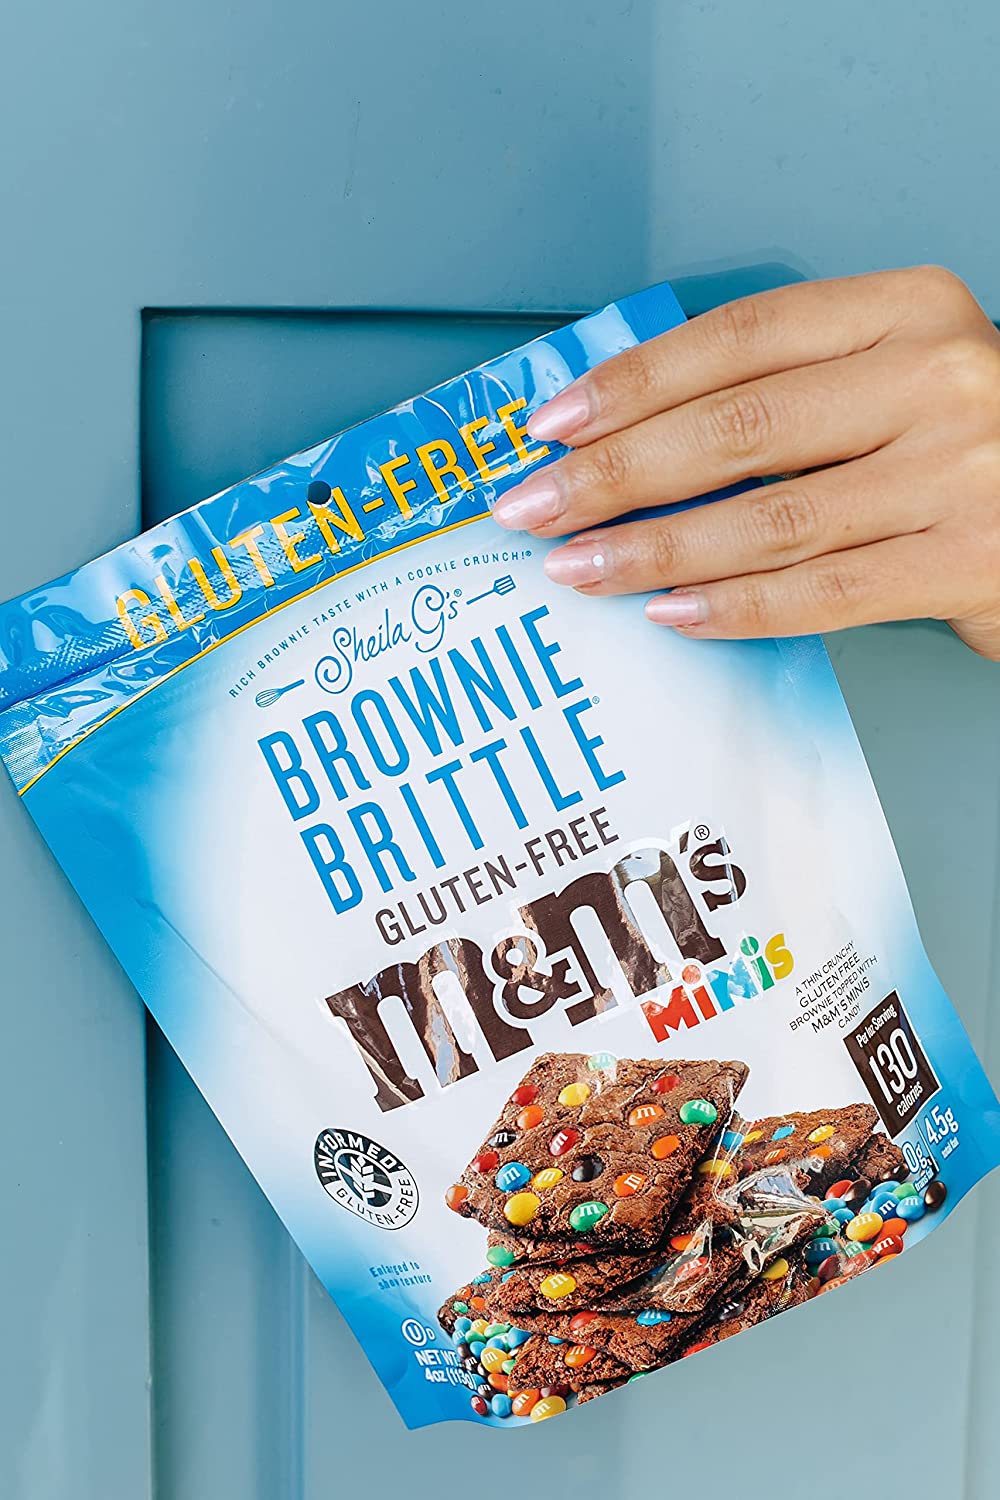 holding a bag of brownie brittle